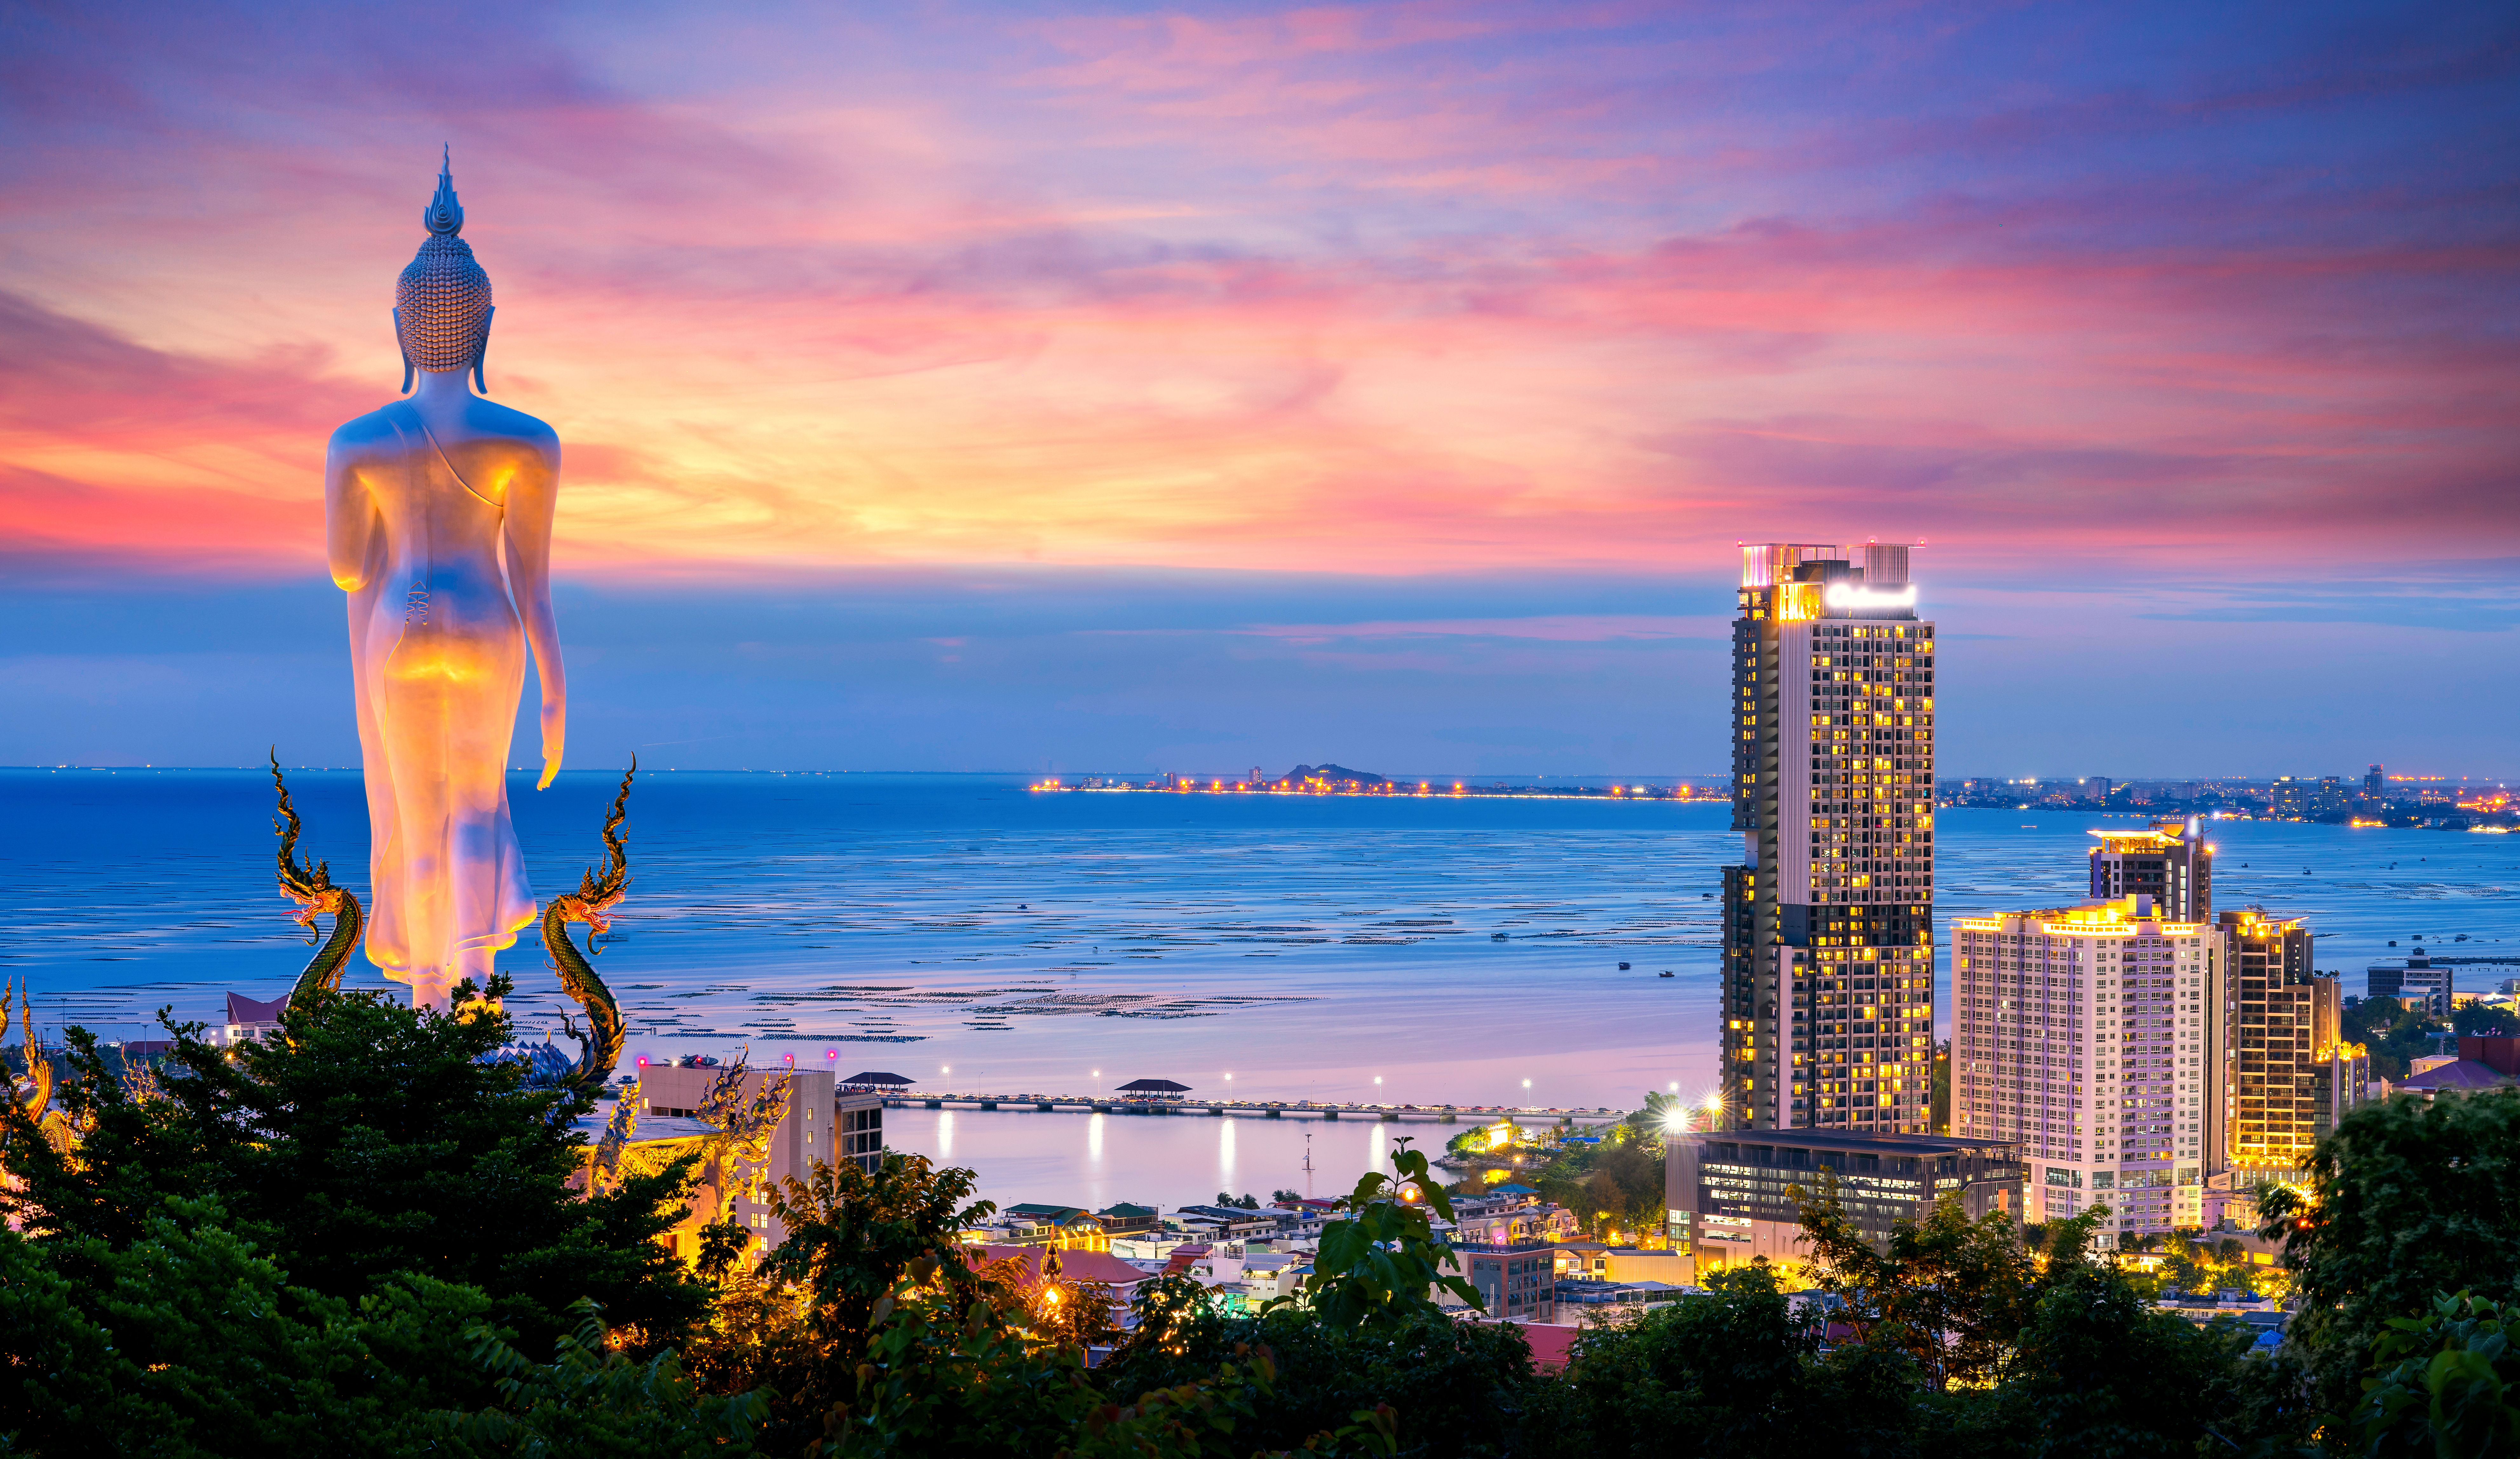 Panoramic view overlooking Pattaya bay at at sunset with purple and pink sky, huge standing big Buddha and hotels.